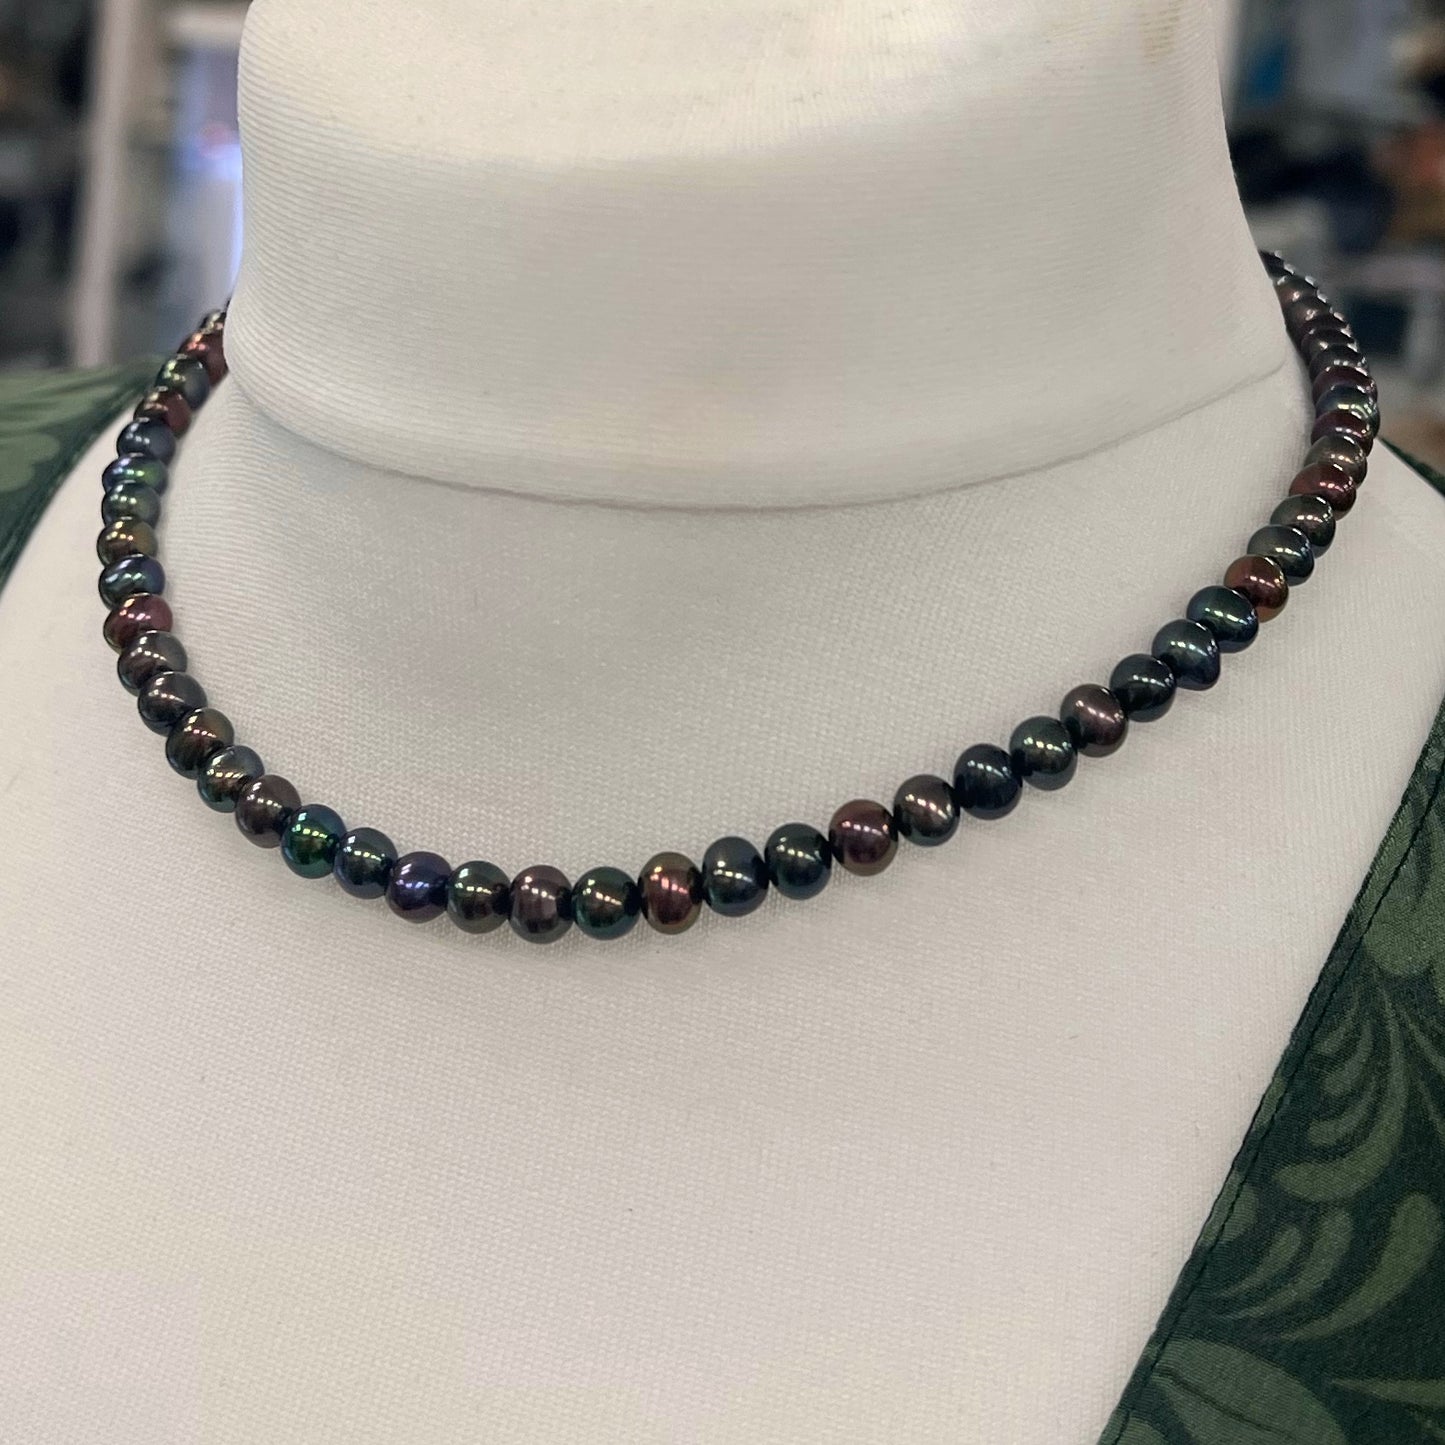 Gents Black Pearl Beaded Necklace